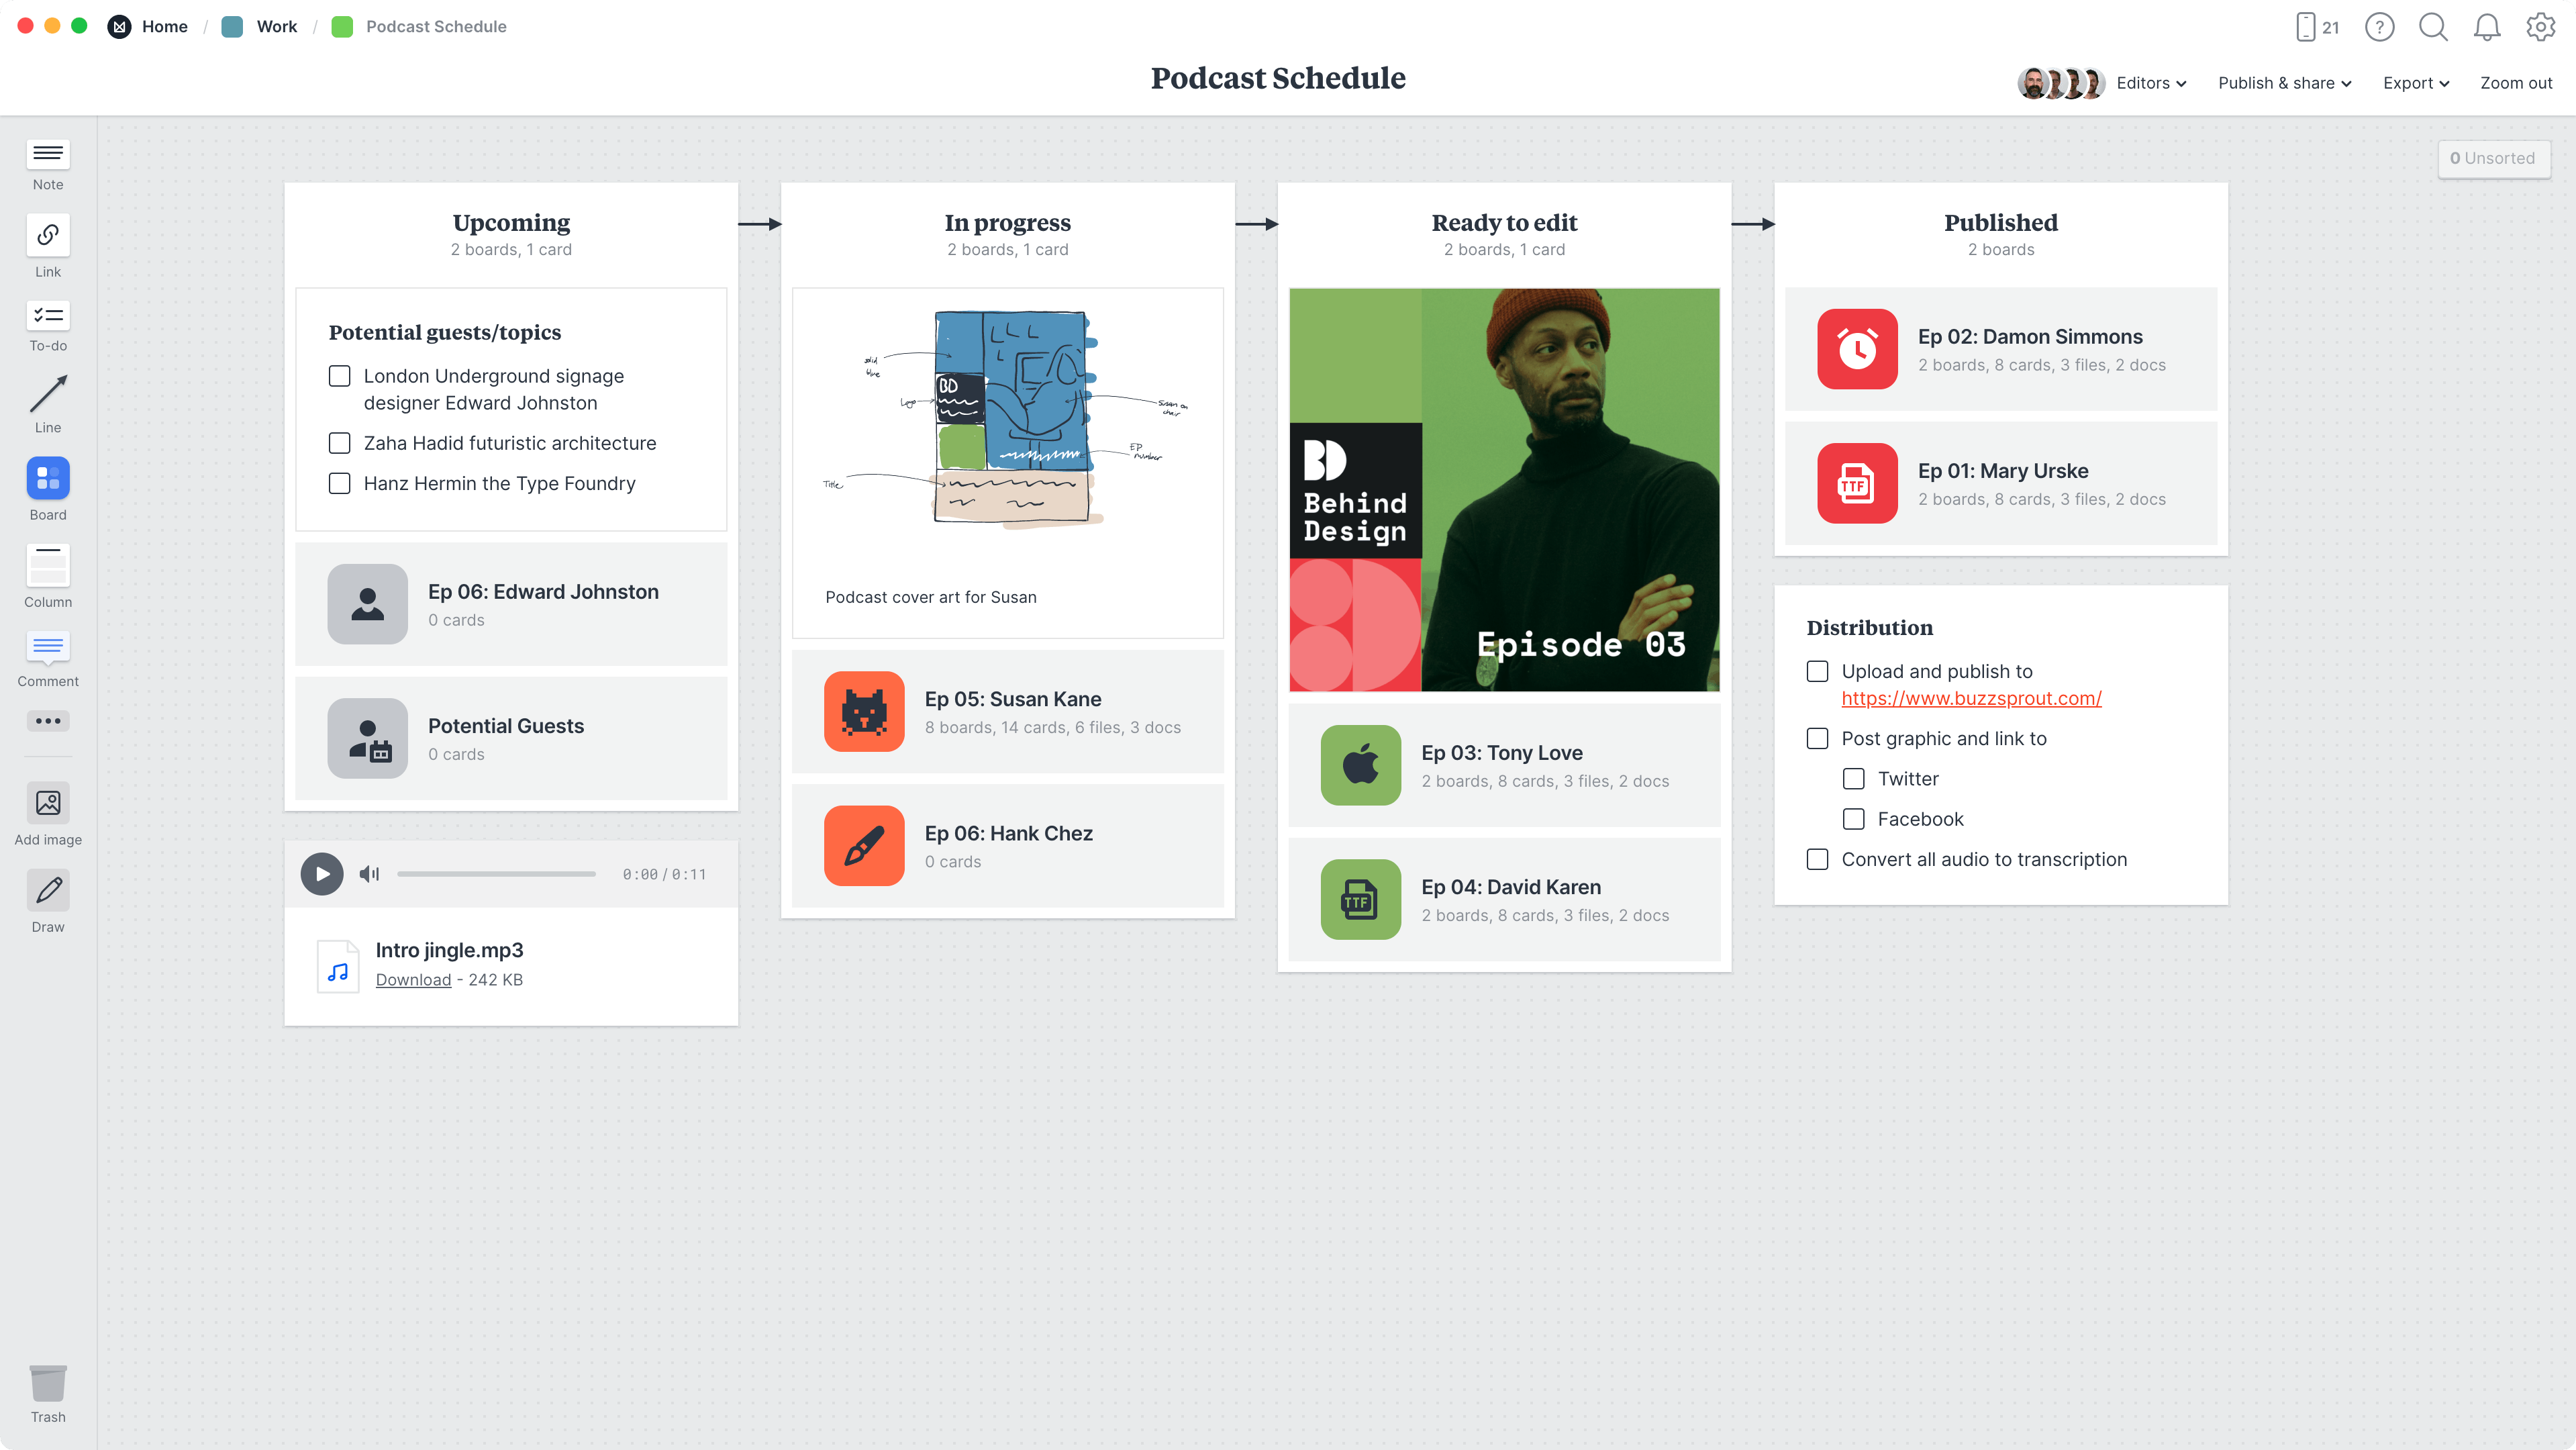 Podcast Schedule Template, within the Milanote app